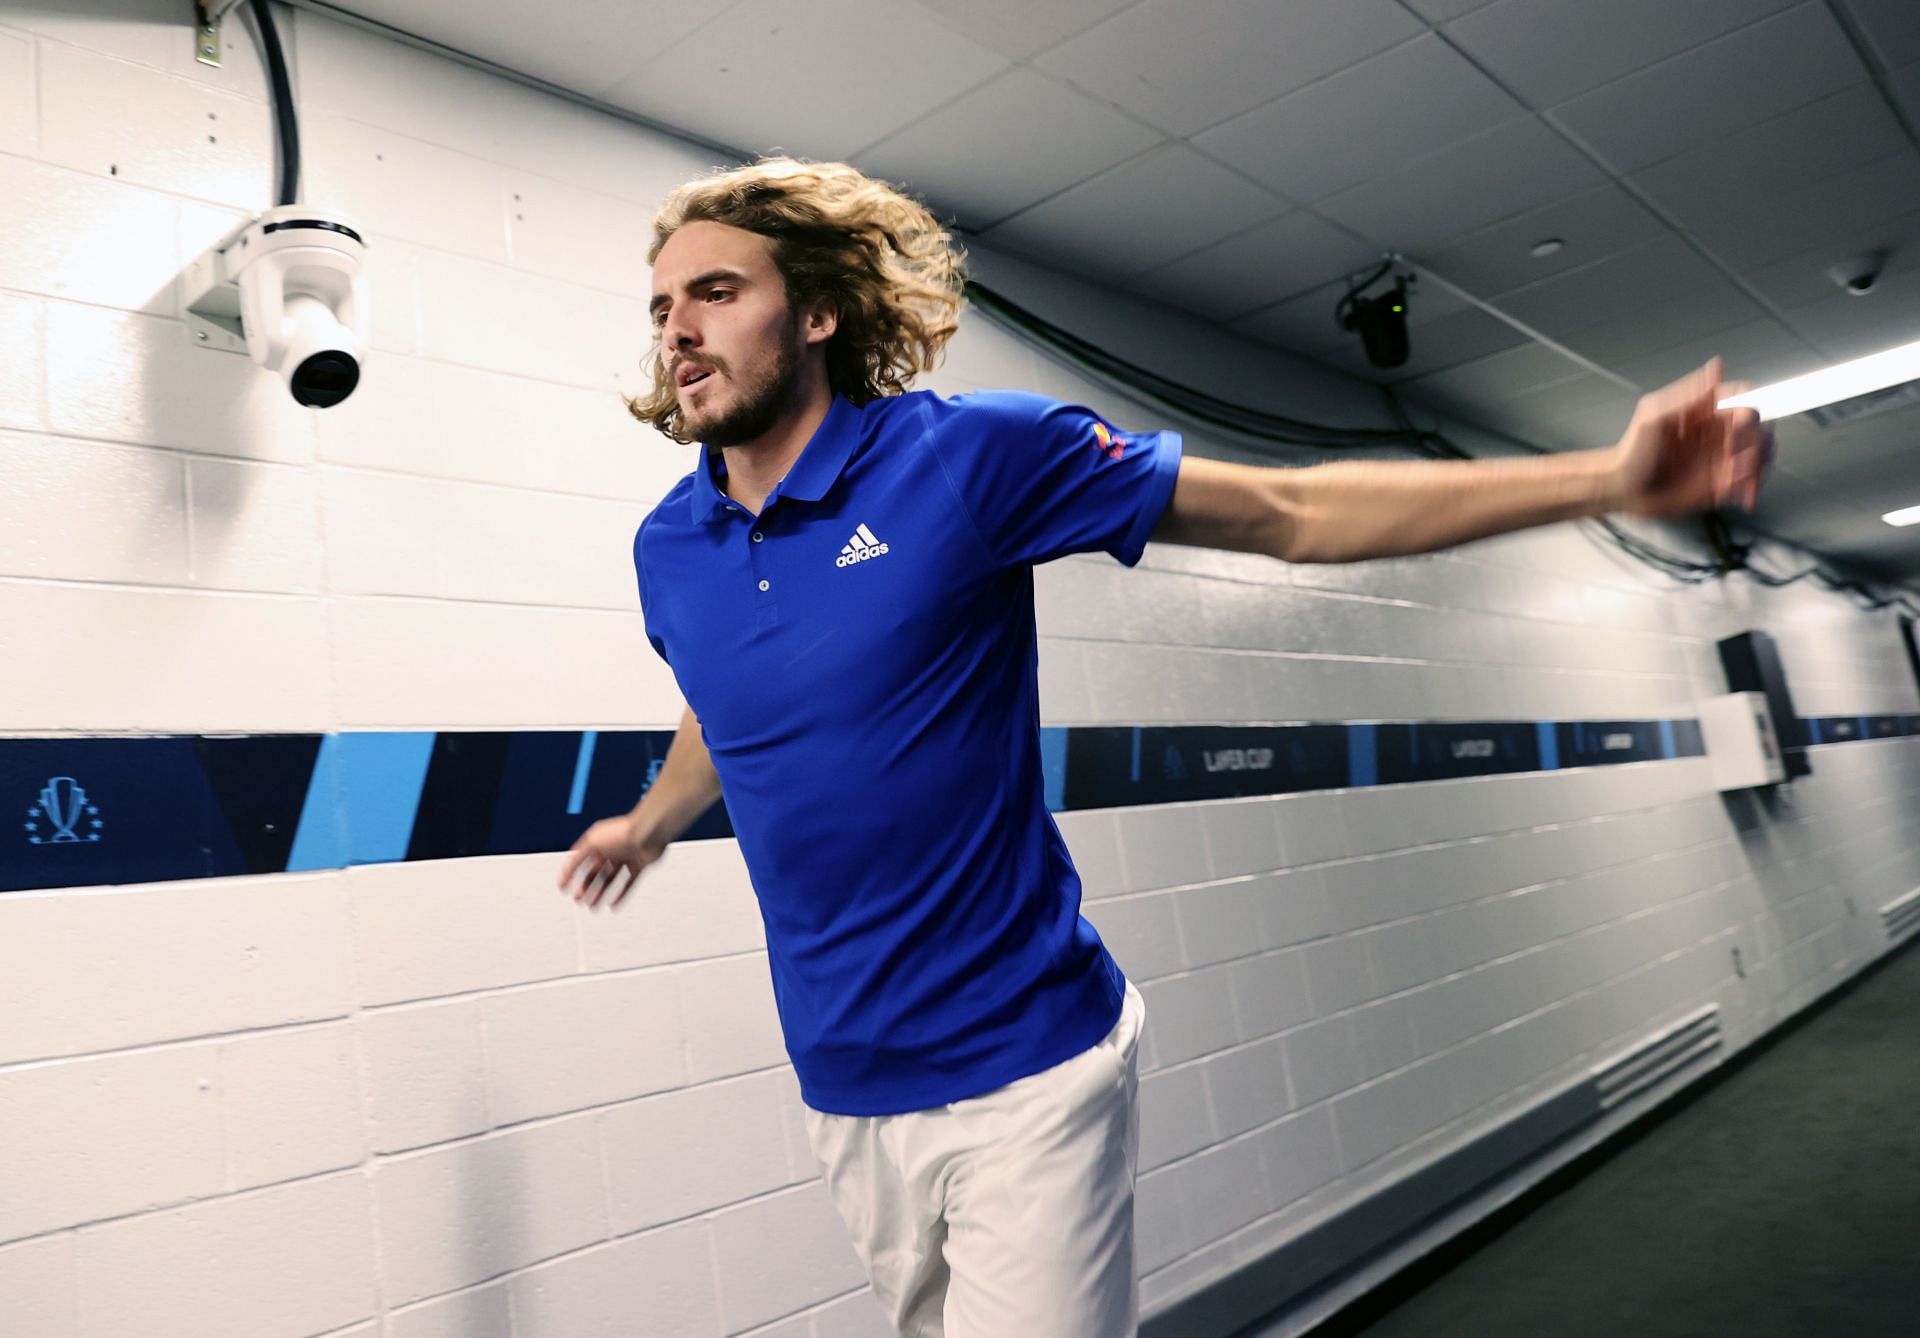 Stefanos Tsitsipas warms up ahead of a match during the Laver Cup 2021